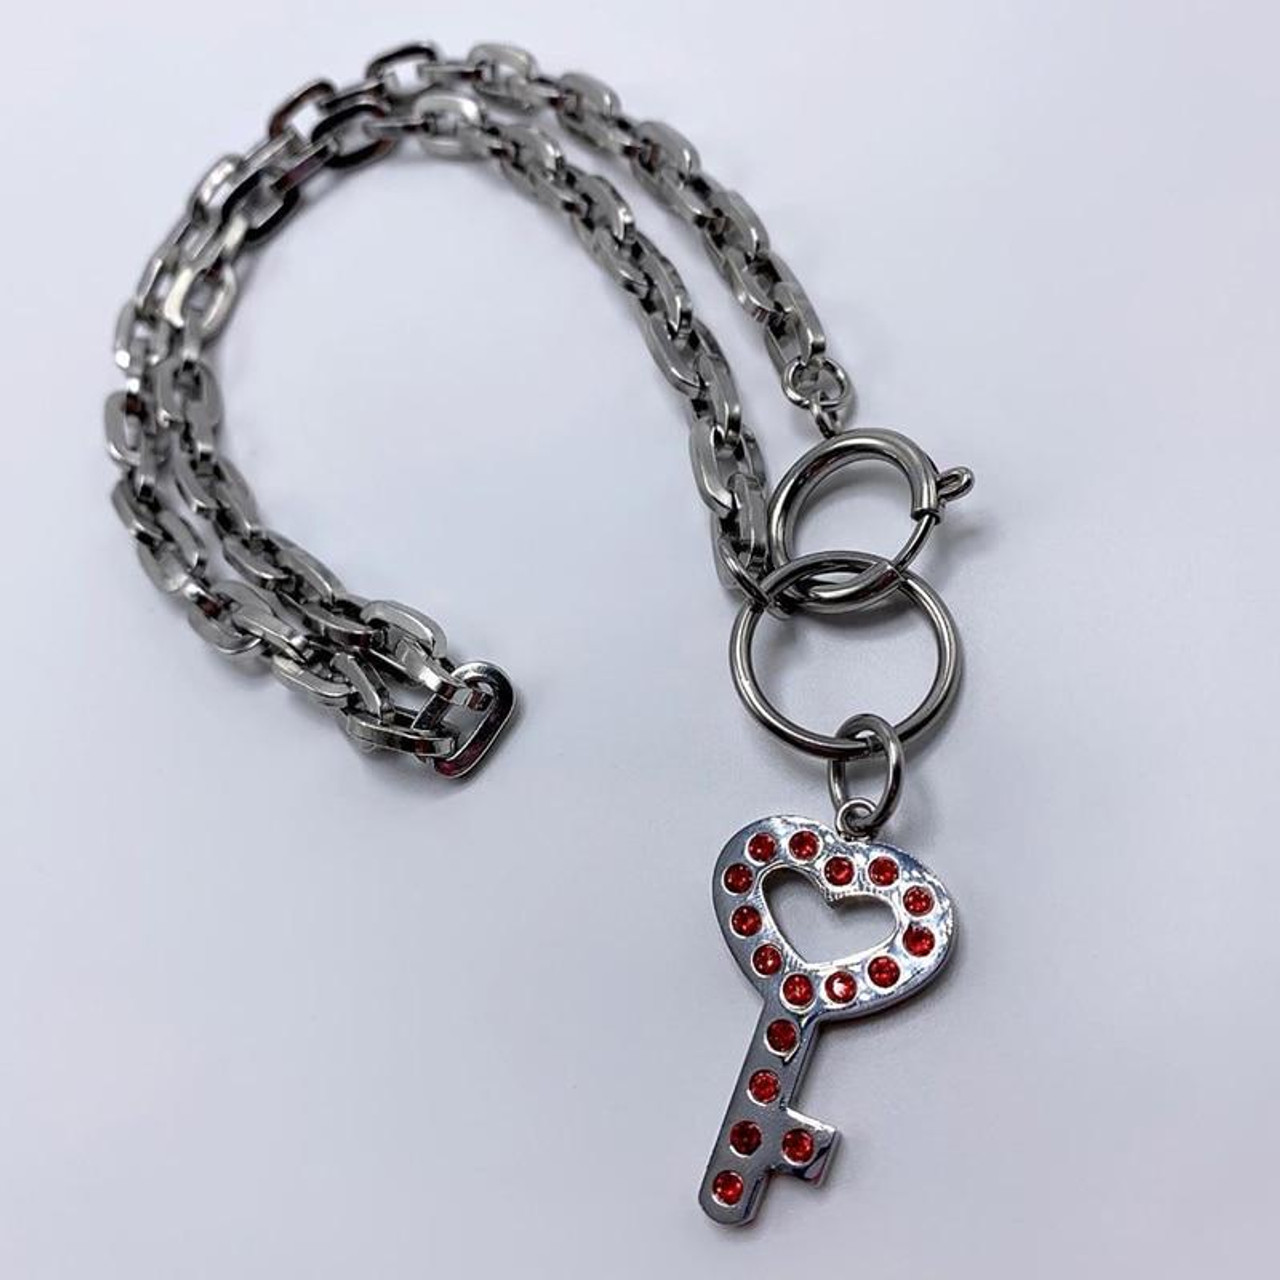 Edgy Heart Key Chain Necklace